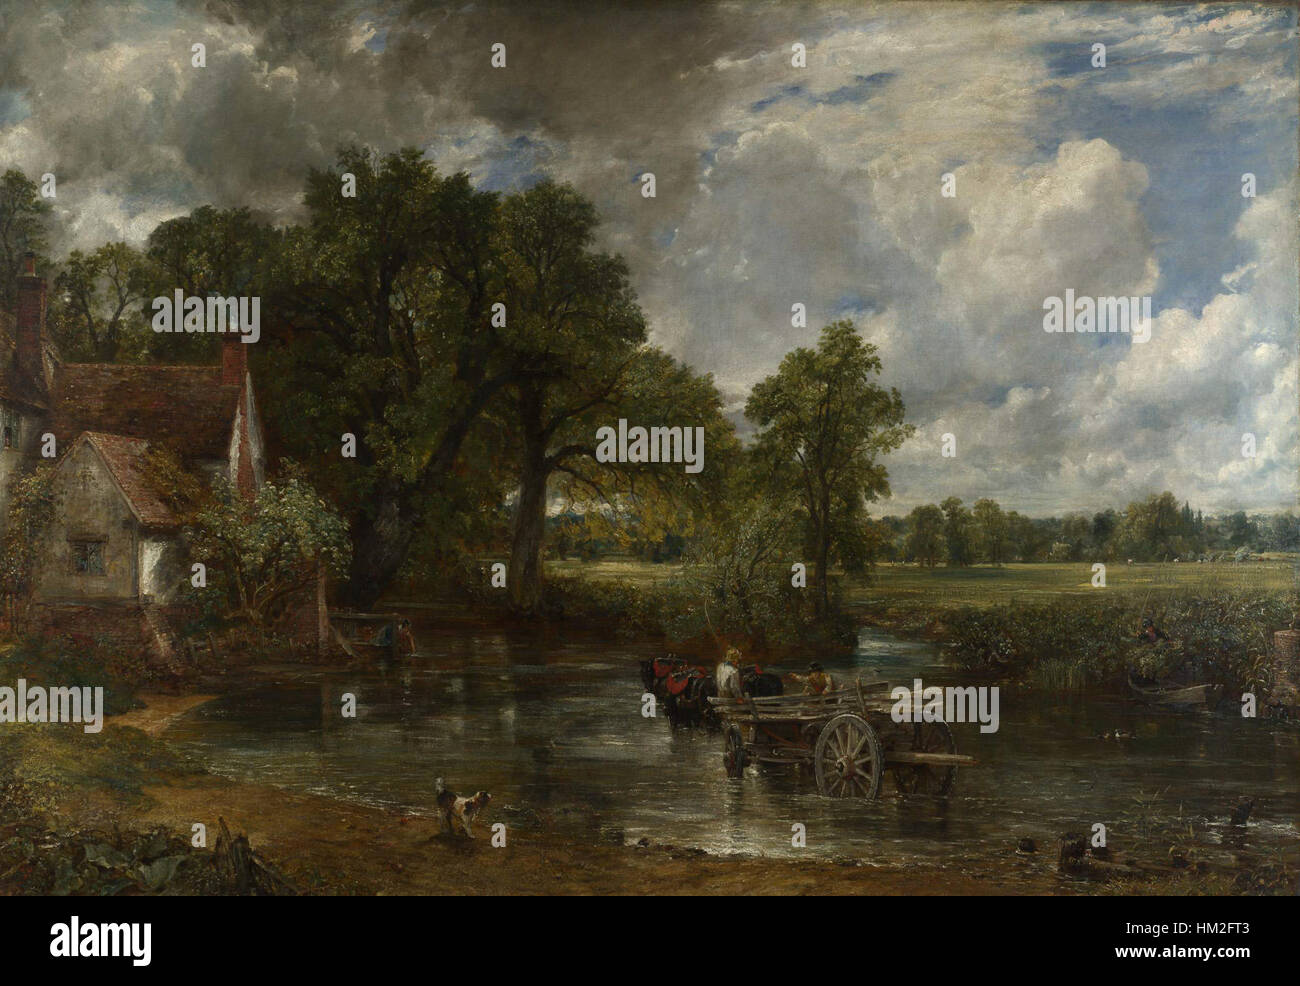 John Constable The Hay Wain Banque D'Images